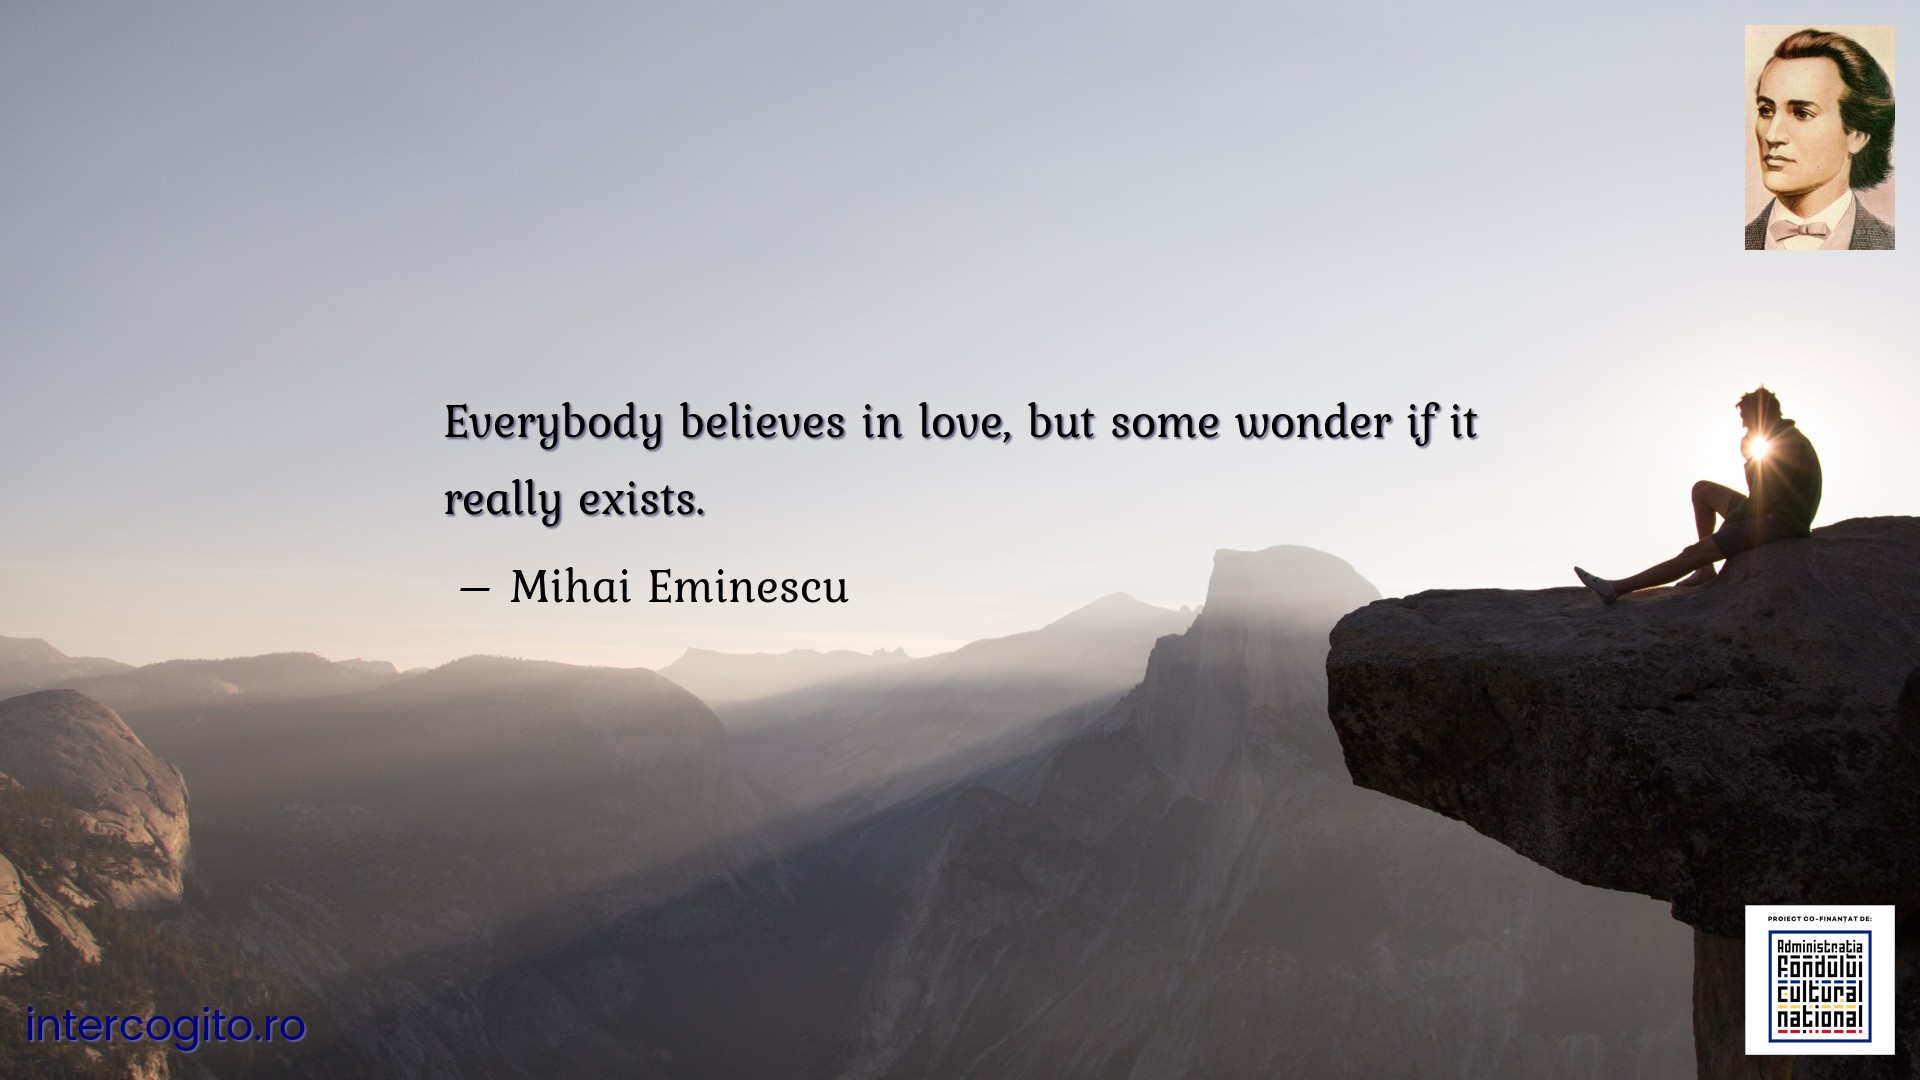 Everybody believes in love, but some wonder if it really exists.